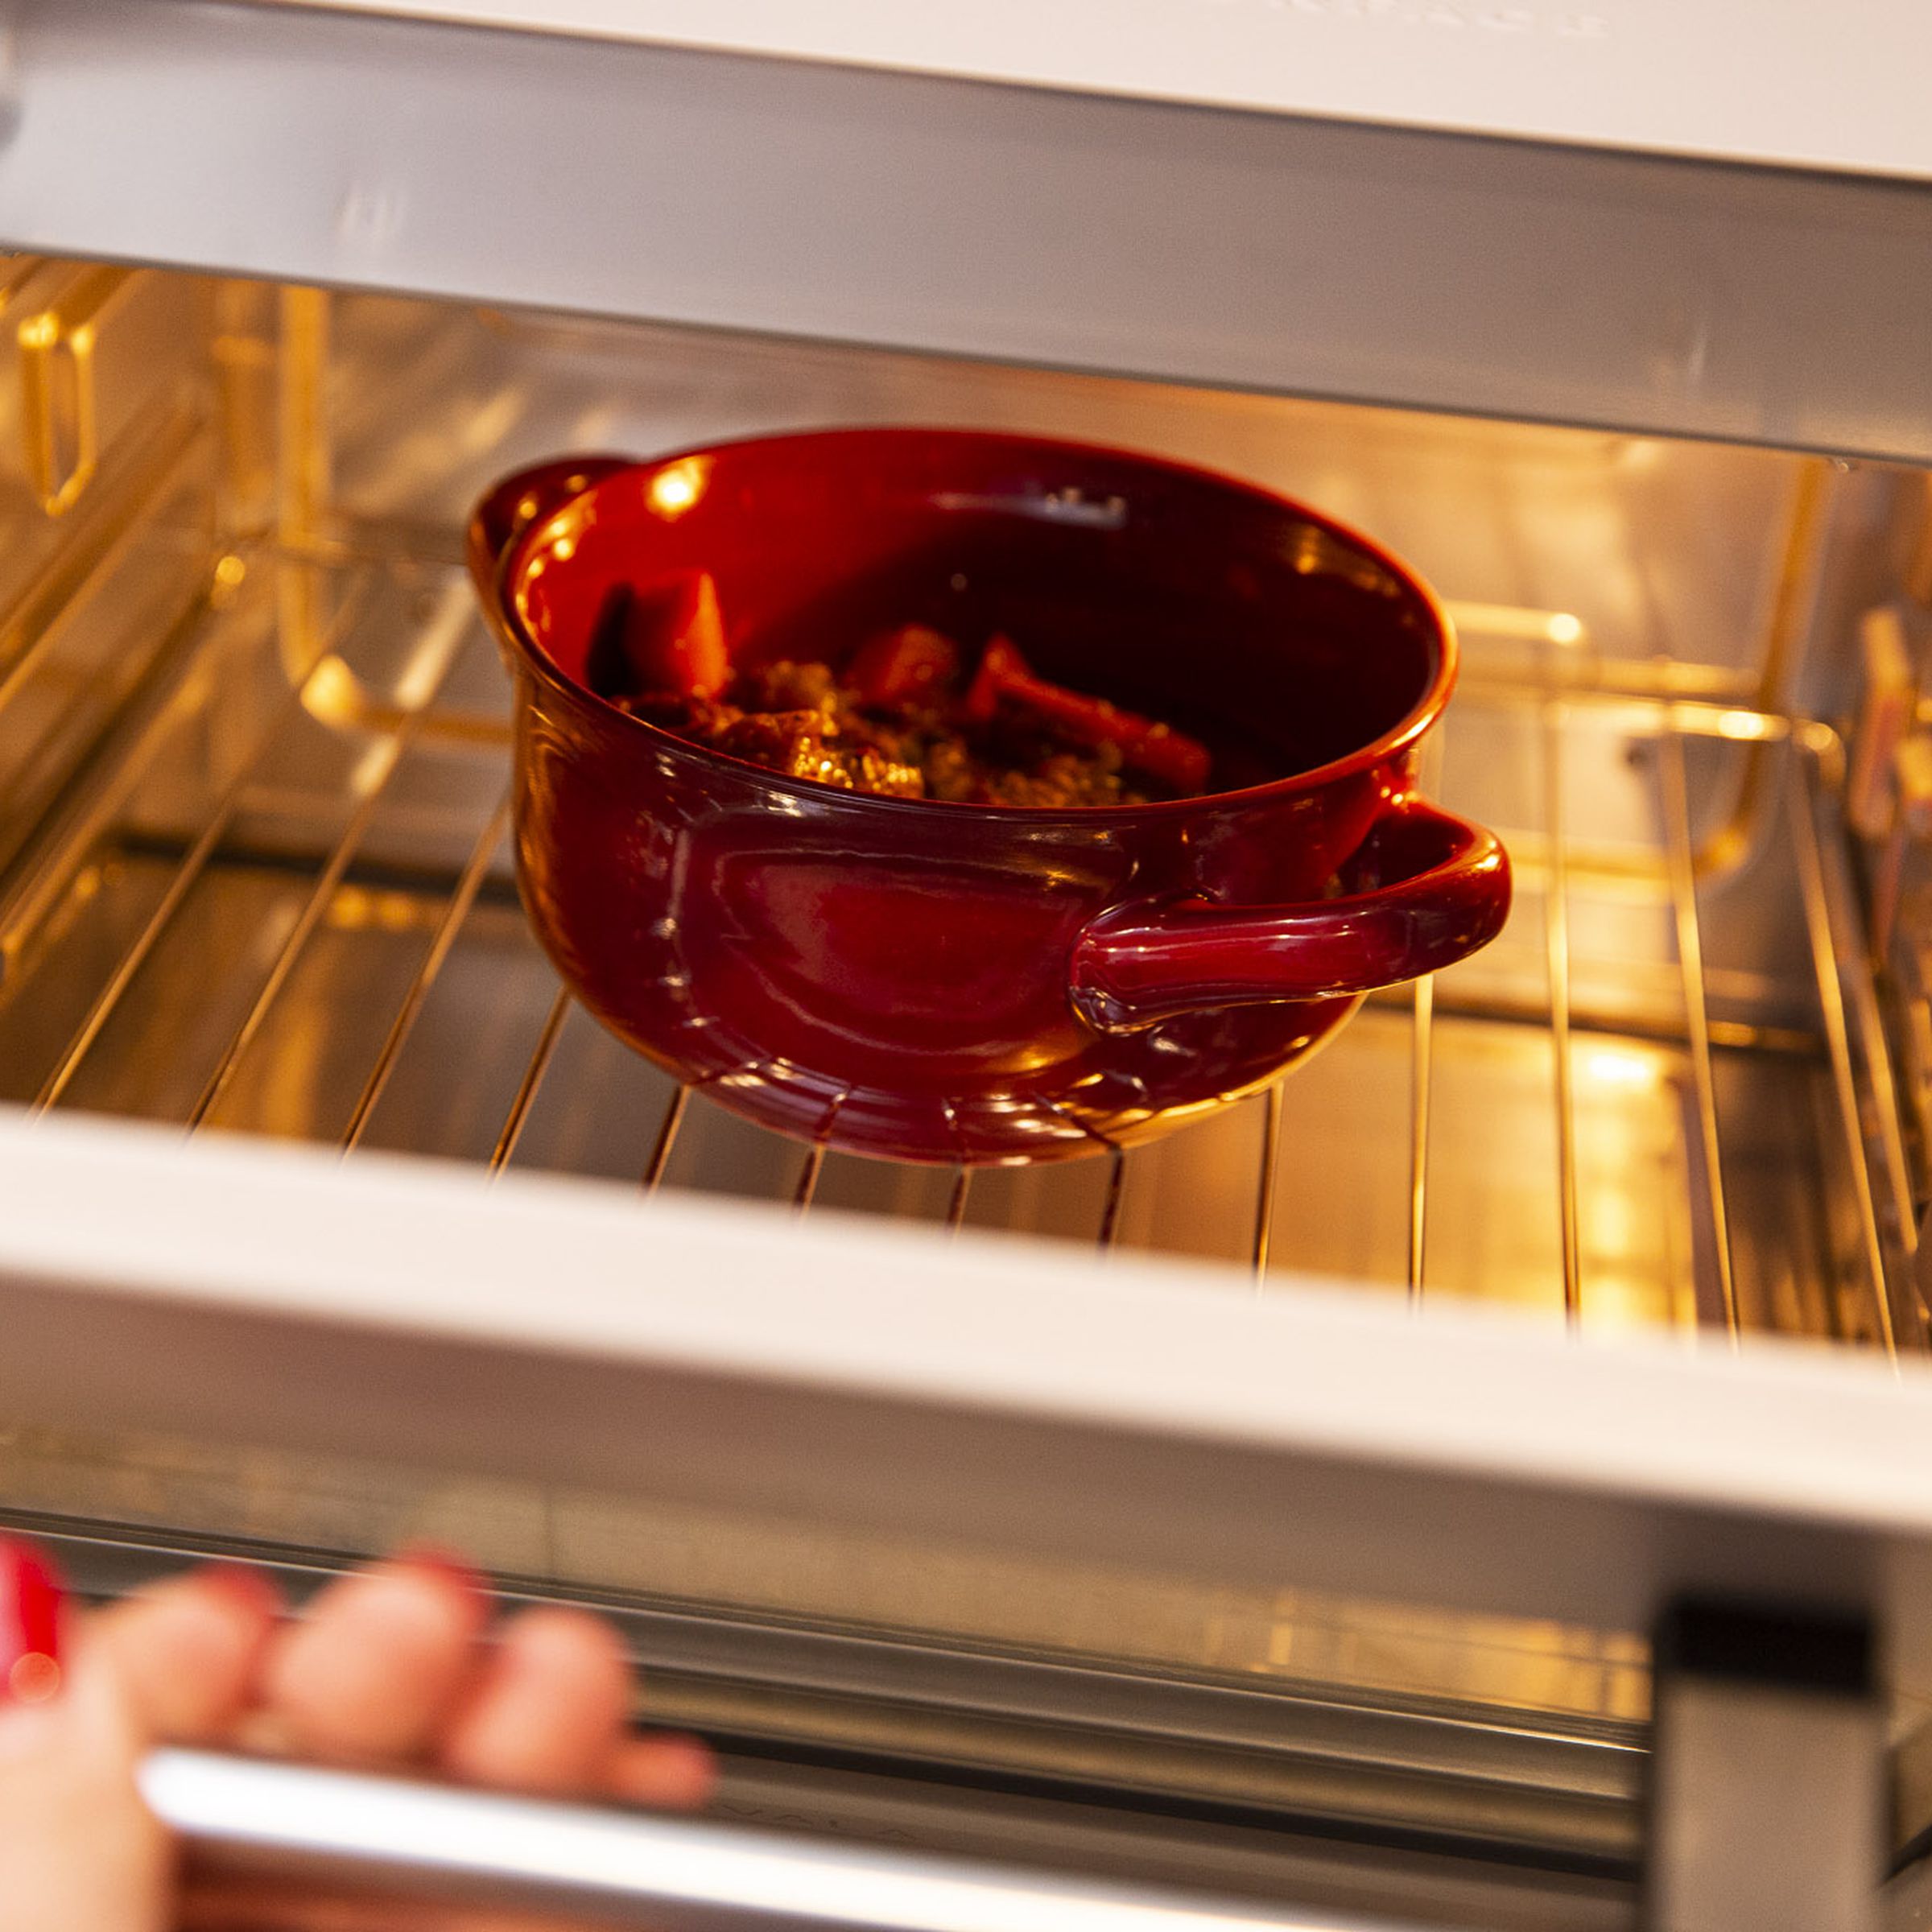 A red bowl in a small countertop oven with the door open.